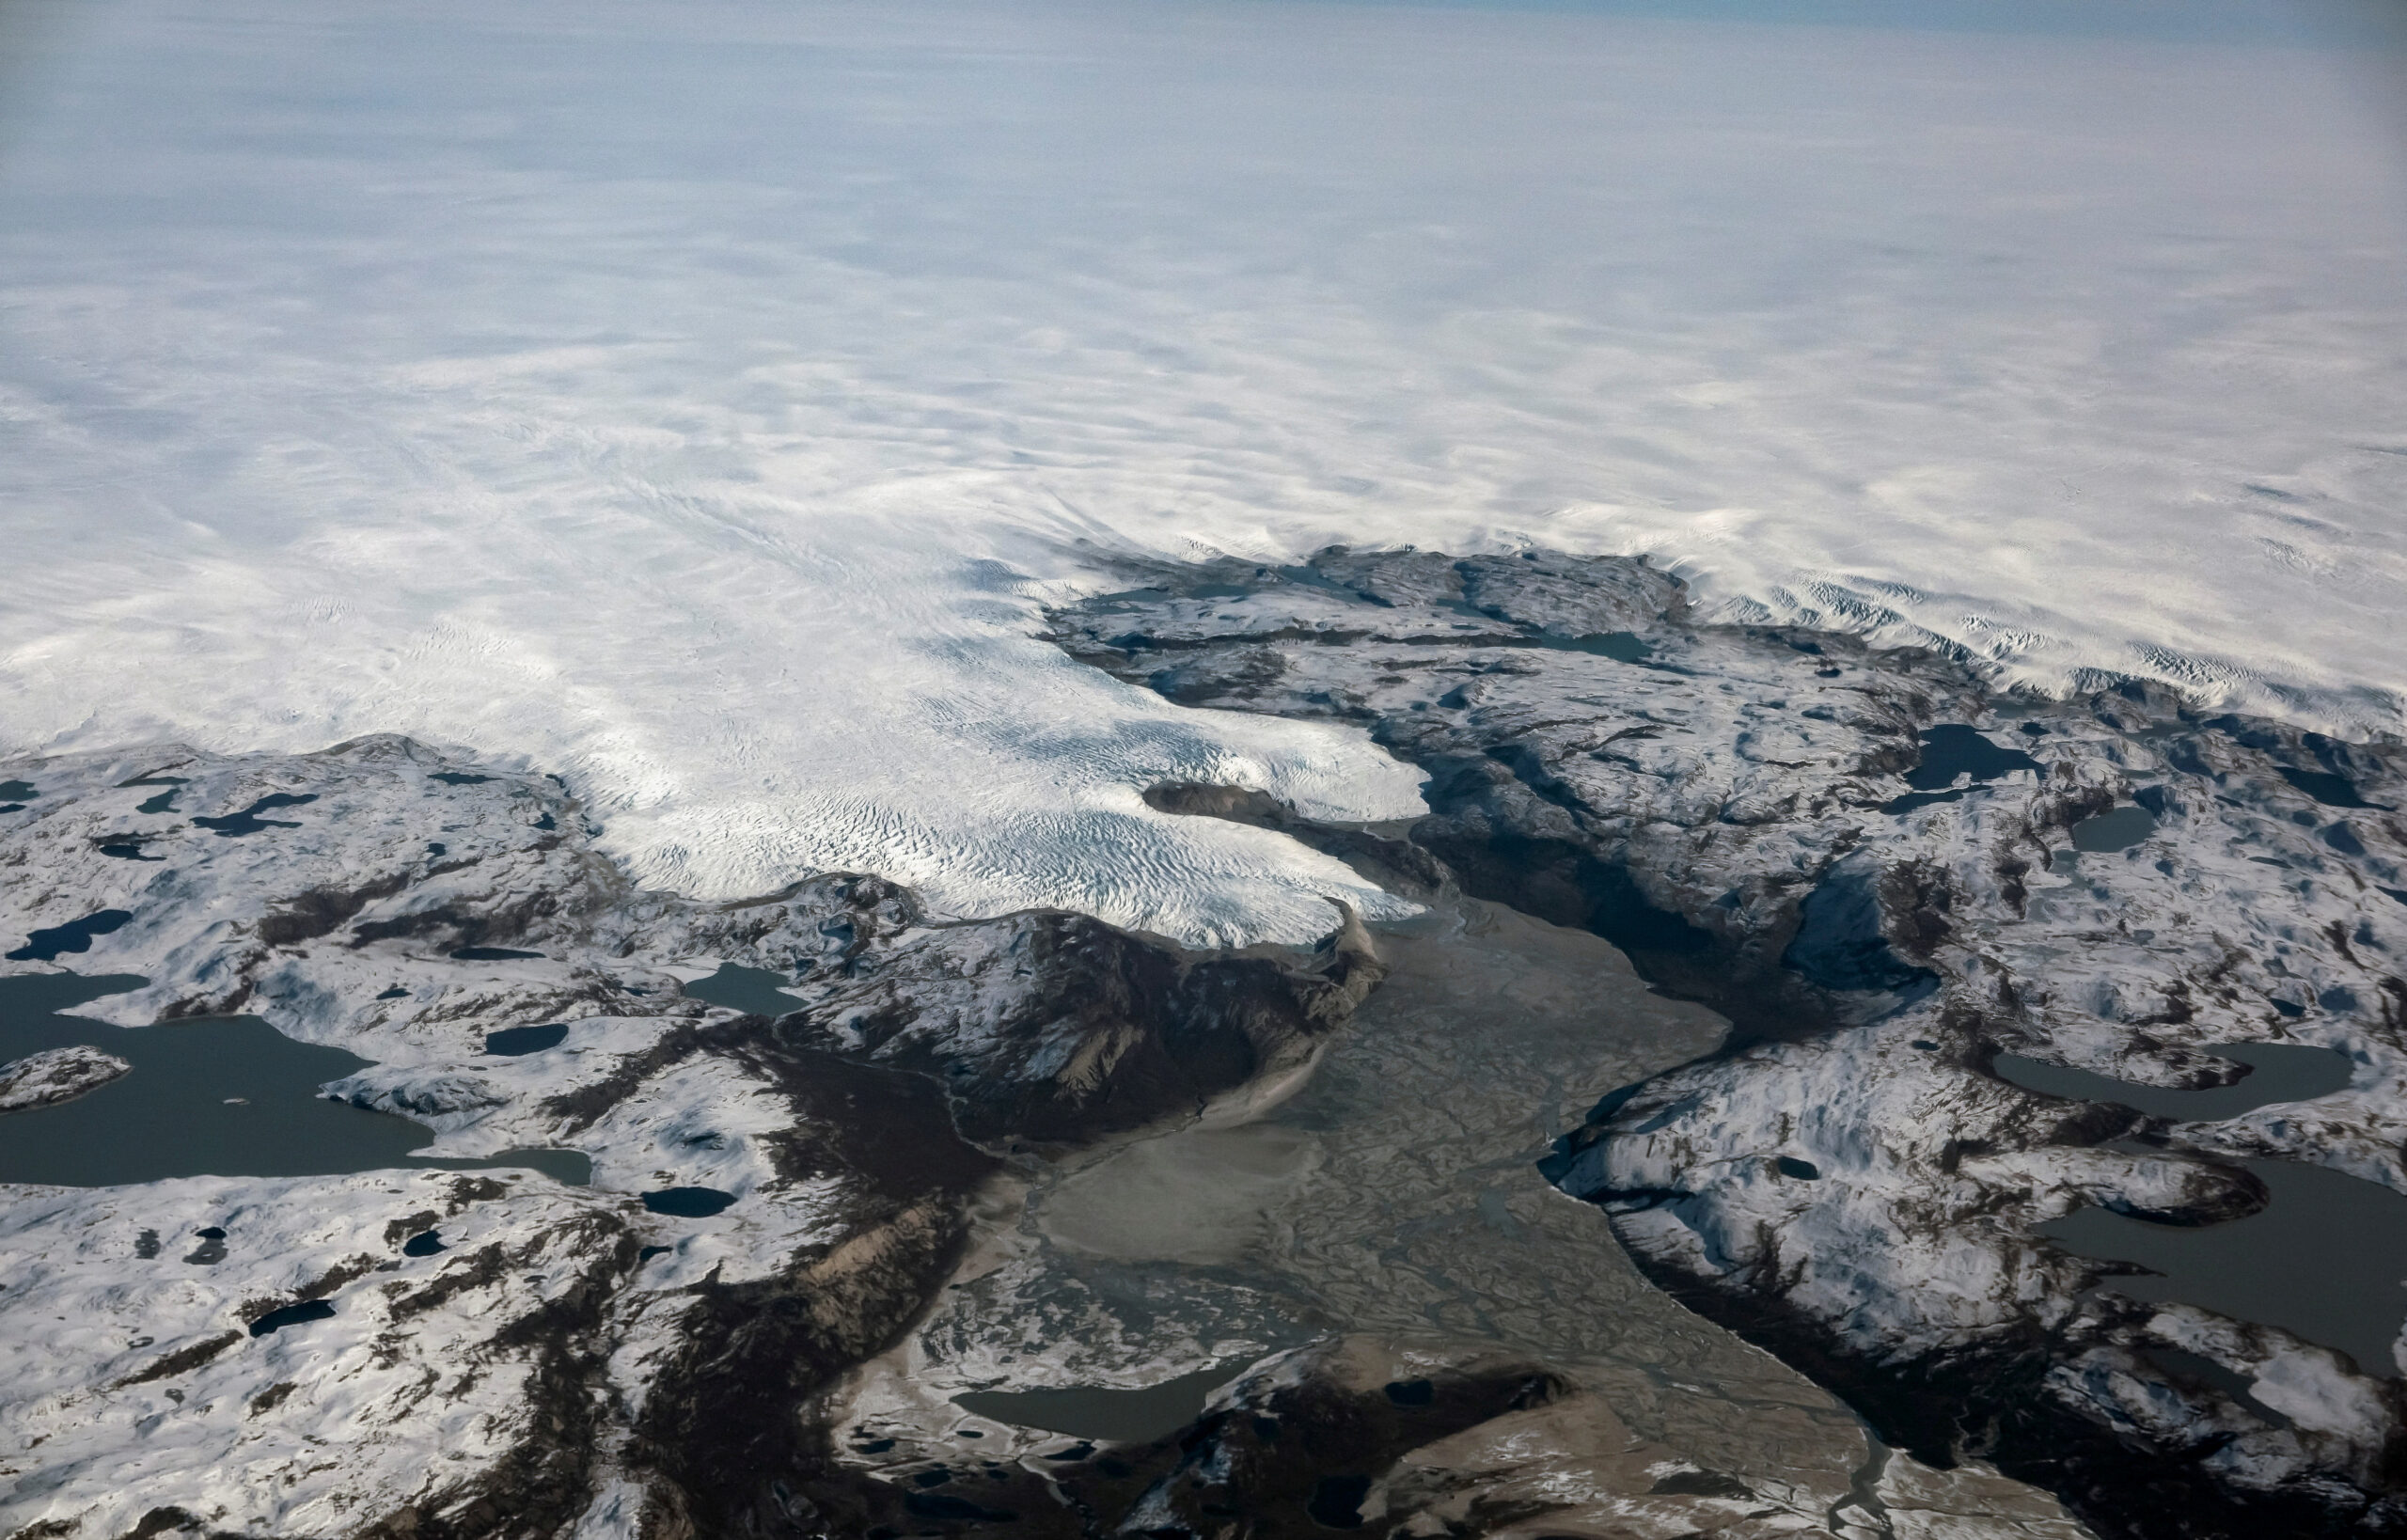 2024 01 17T164835Z 1344256647 RC2RJ5AUUKTU RTRMADP 3 CLIMATE CHANGE GREENLAND ICE scaled